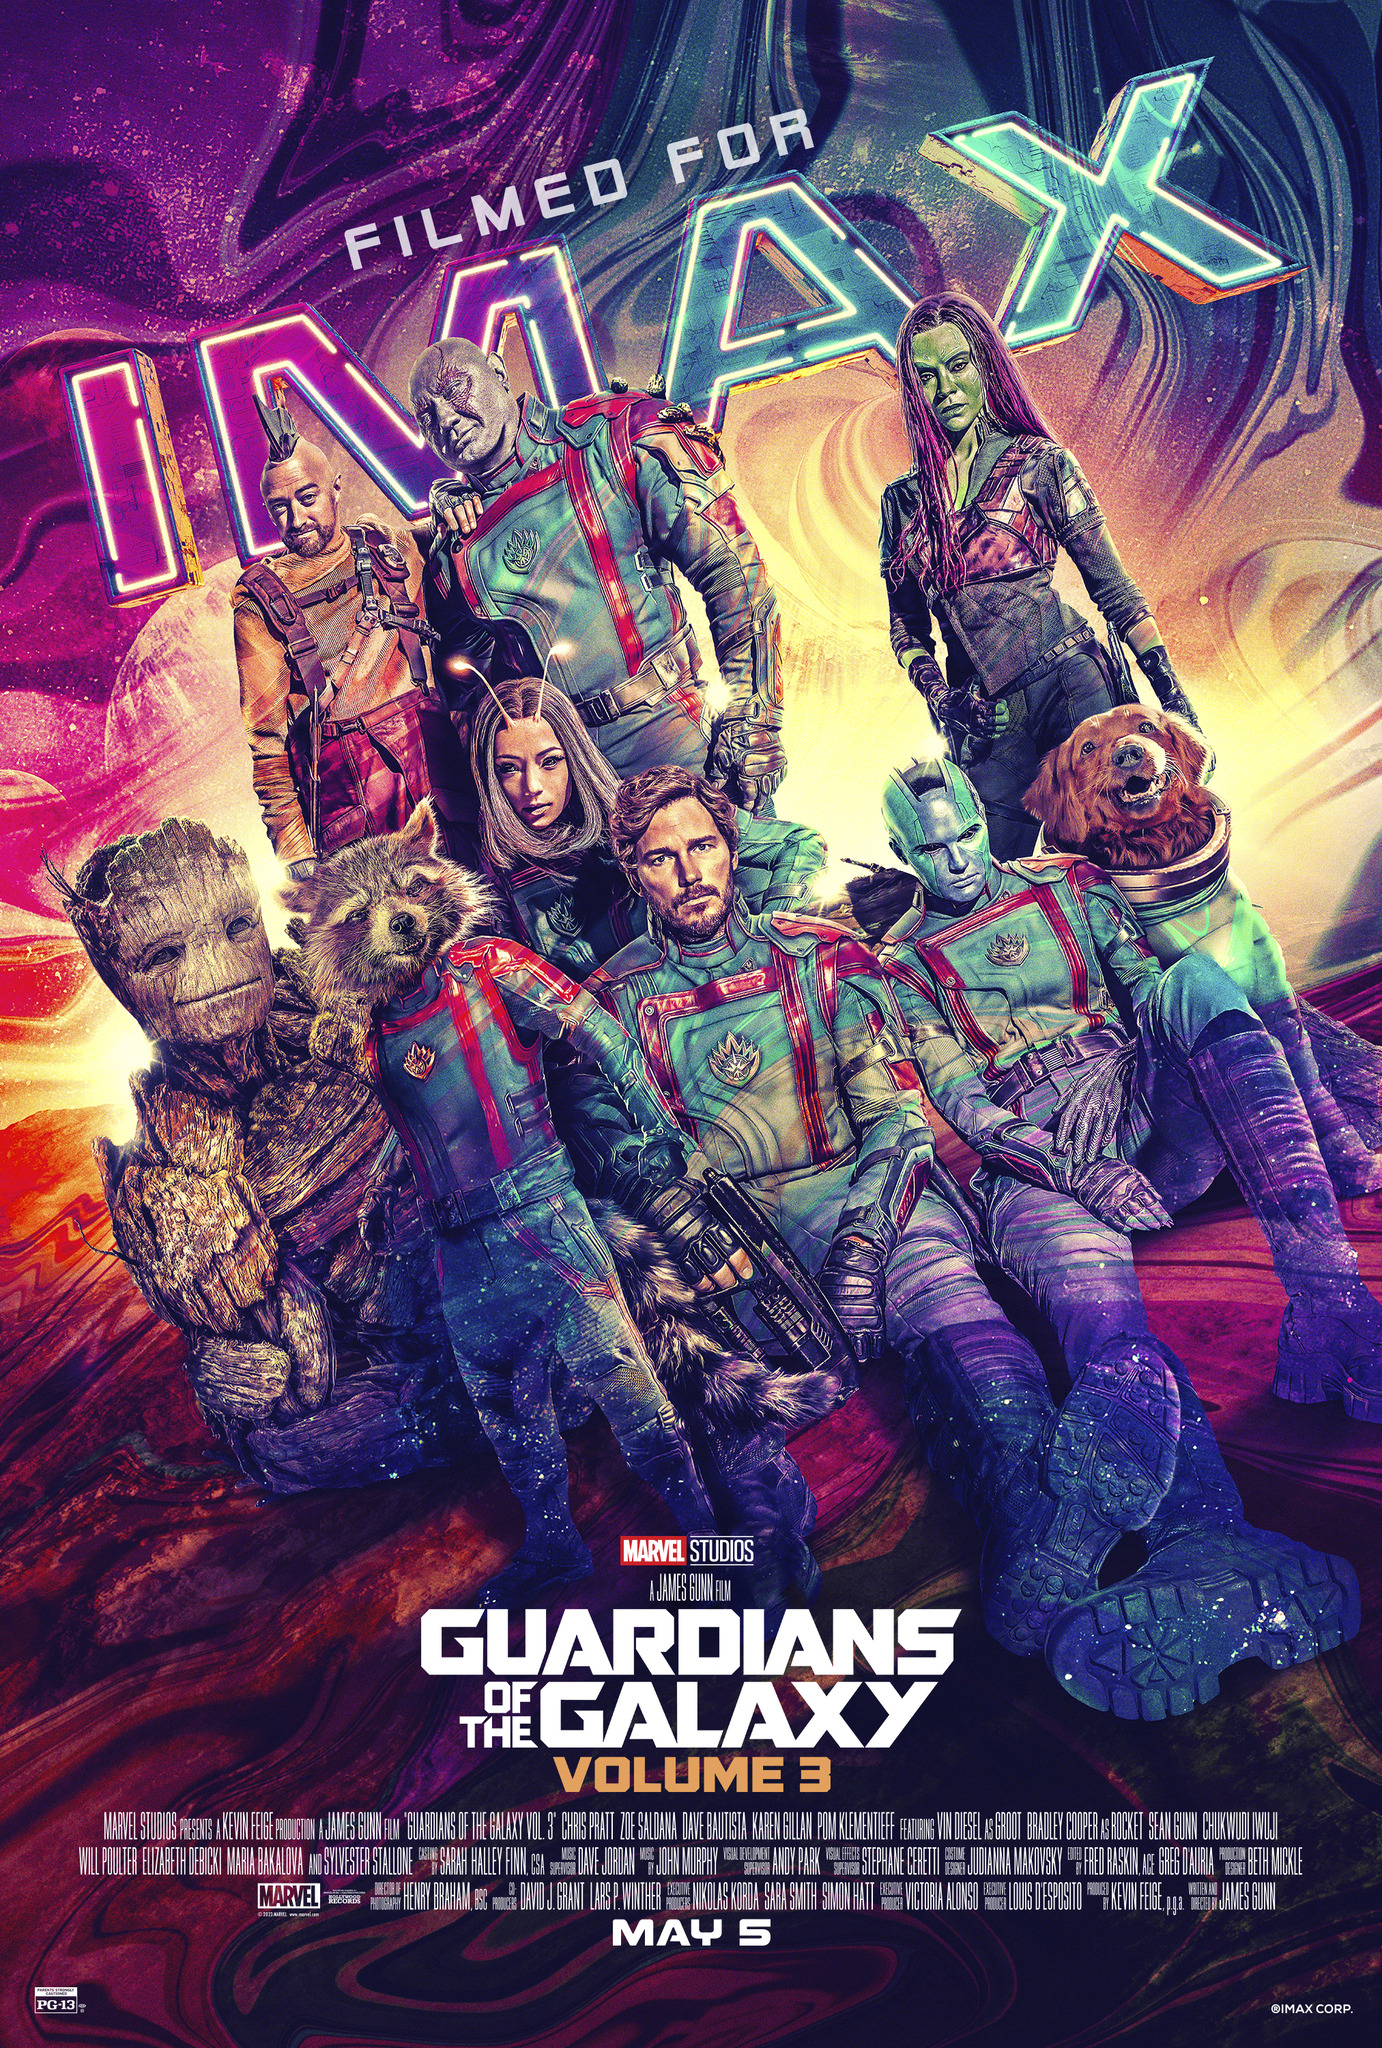 Mega Sized Movie Poster Image for Guardians of the Galaxy Vol. 3 (#3 of 20)